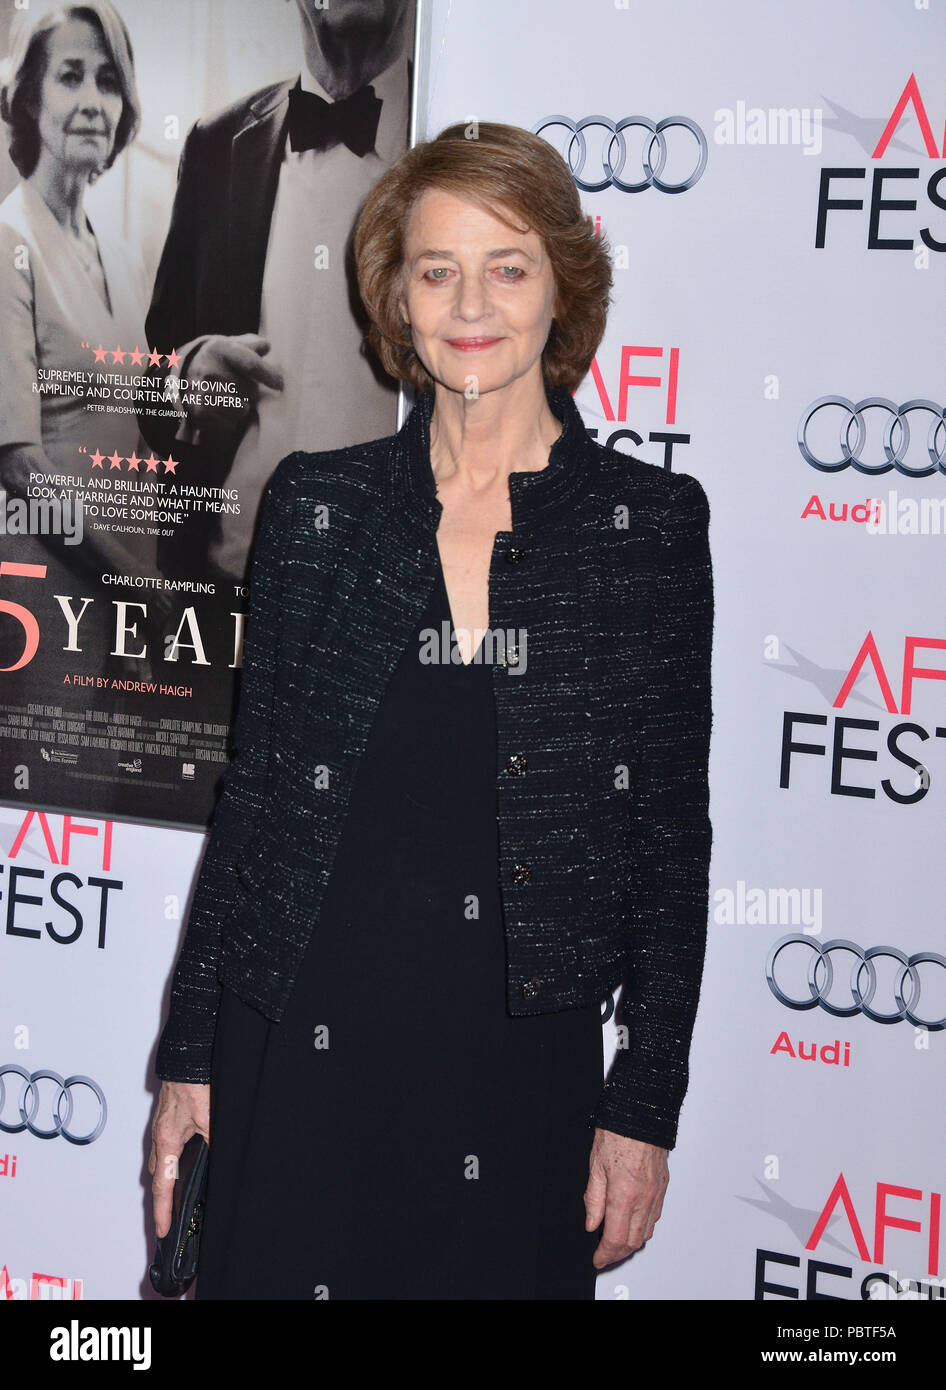 Charlotte Rambling 013 at the Tribute to Charlotte Rampling and Tom Courtenay at the AFI Film Festival, 45 years ,  at the TCL Chinese Theatre in Los Angeles. November 11, 2015.Charlotte Rambling 013 ------------- Red Carpet Event, Vertical, USA, Film Industry, Celebrities,  Photography, Bestof, Arts Culture and Entertainment, Topix Celebrities fashion /  Vertical, Best of, Event in Hollywood Life - California,  Red Carpet and backstage, USA, Film Industry, Celebrities,  movie celebrities, TV celebrities, Music celebrities, Photography, Bestof, Arts Culture and Entertainment,  Topix, Three Qua Stock Photo